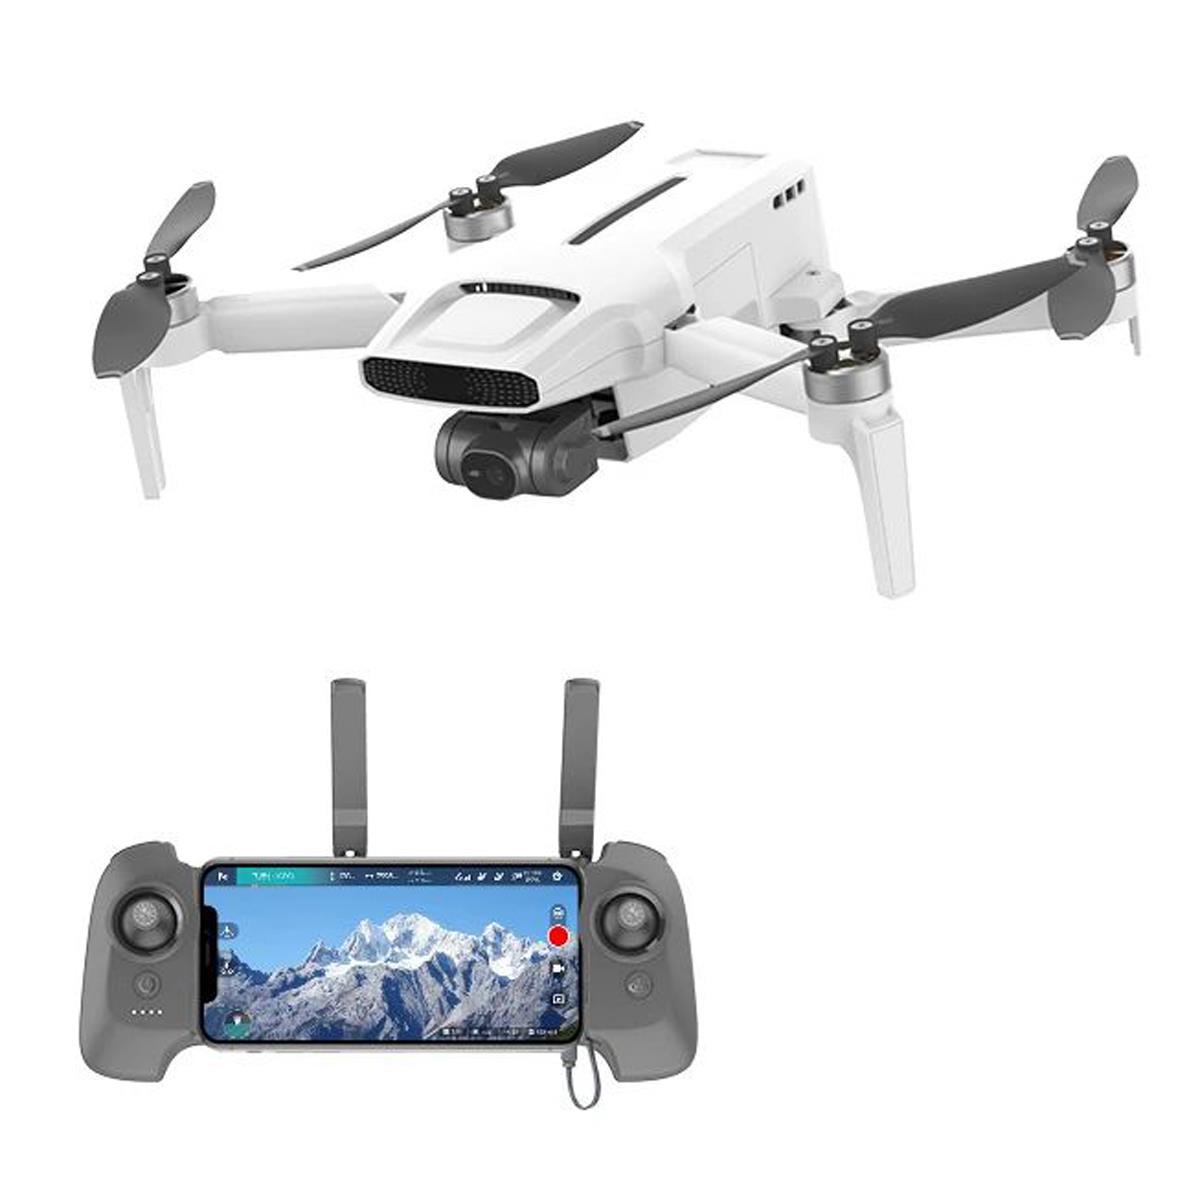 FIMI X8 mini Pro Drone with 4K Camera for Adult Beginner, 245g Ultralight Foldable RC Quadcopter with 3-Axis Gimbal, 31min Flight Time, 8km Video Transmission, 27W Type-C Battery, 12MP Photo - image 1 of 6